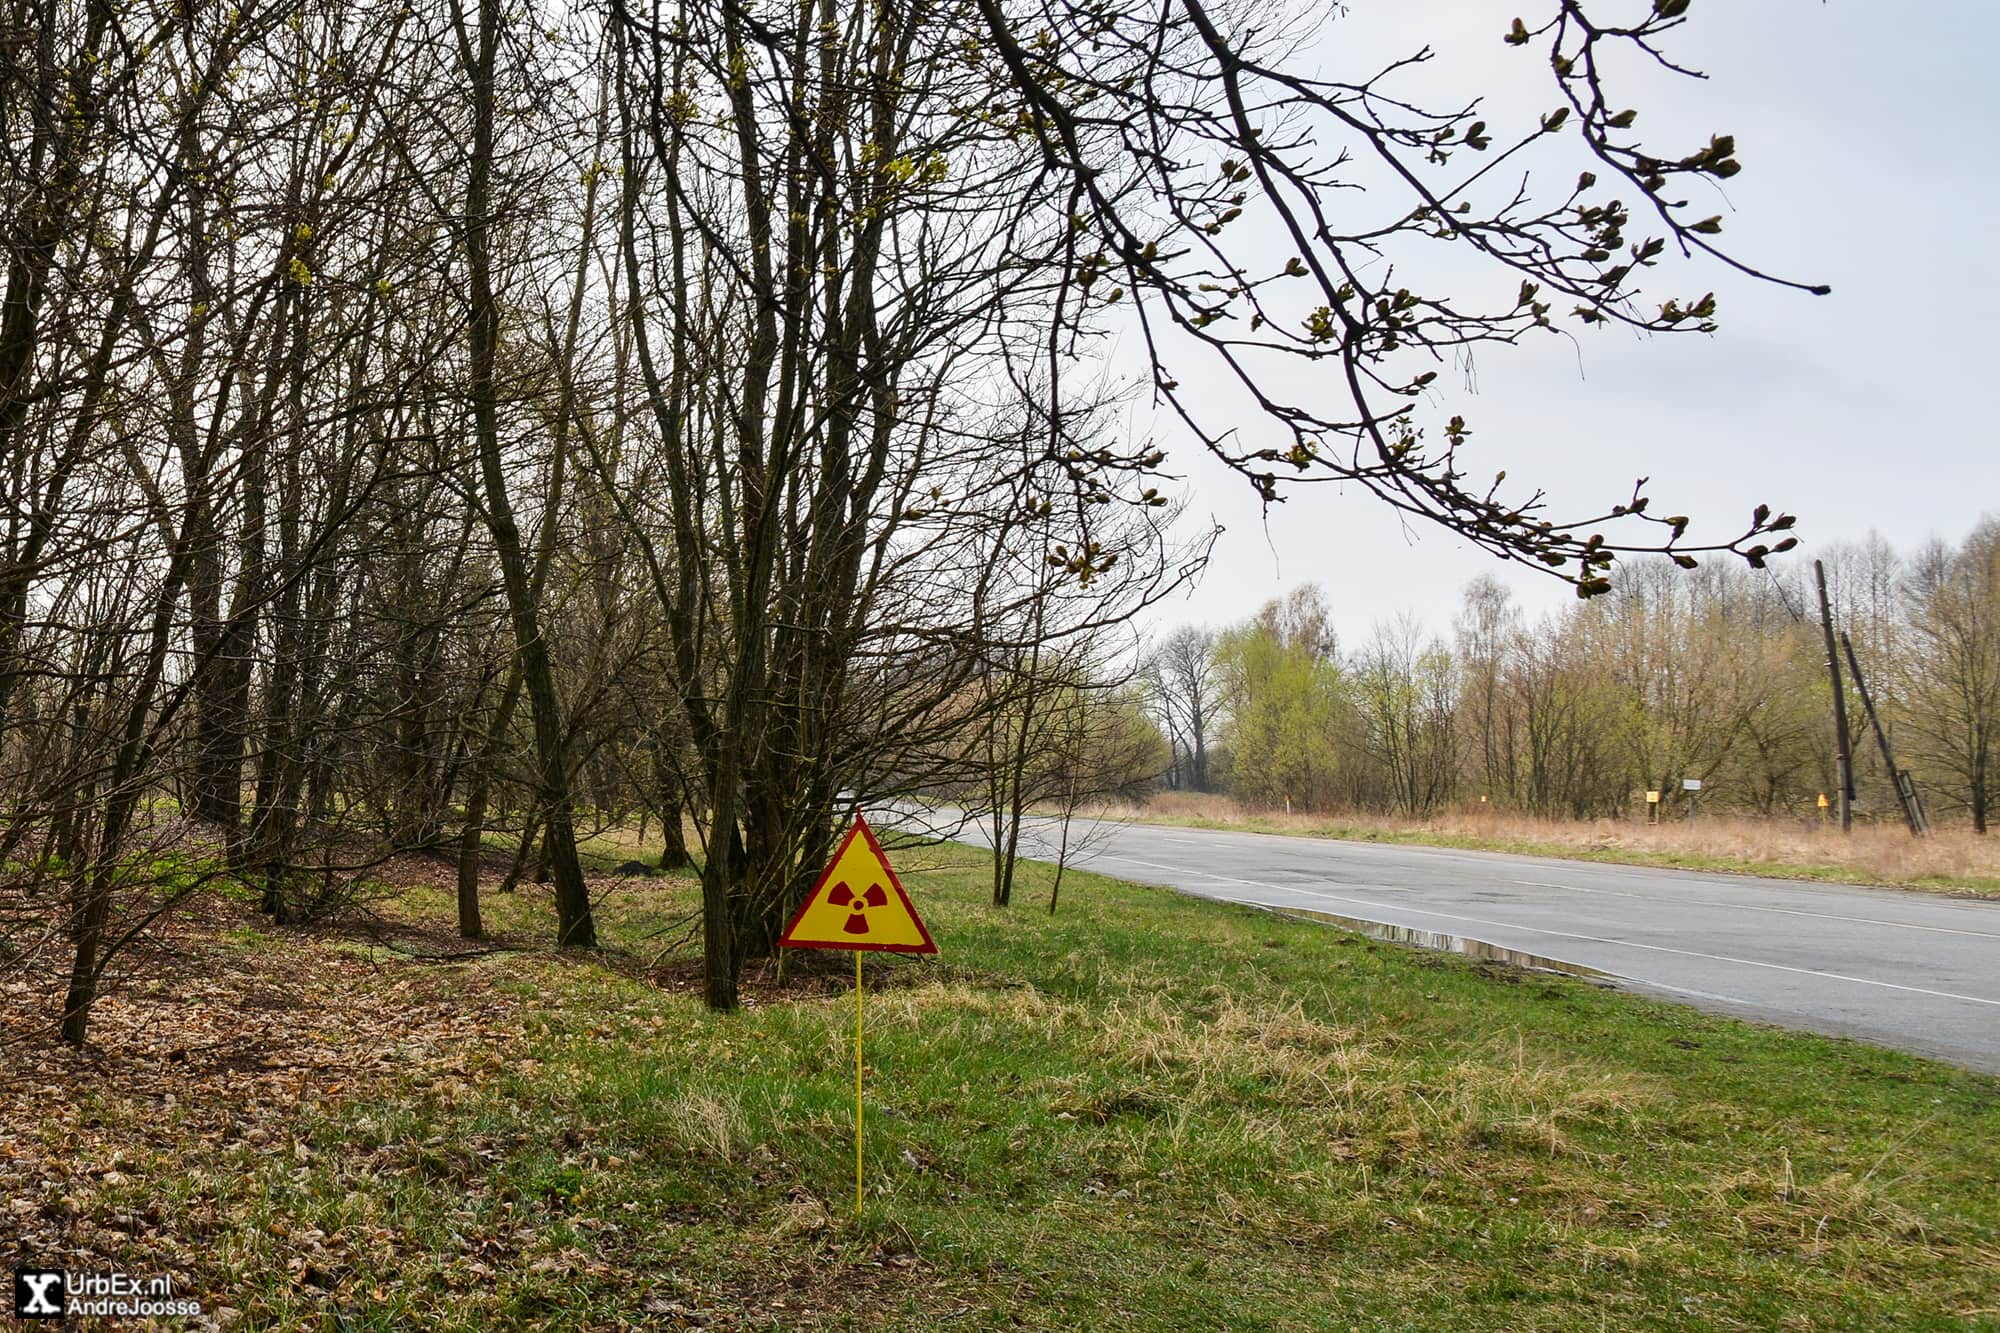 Chernobyl Exclusion Zone